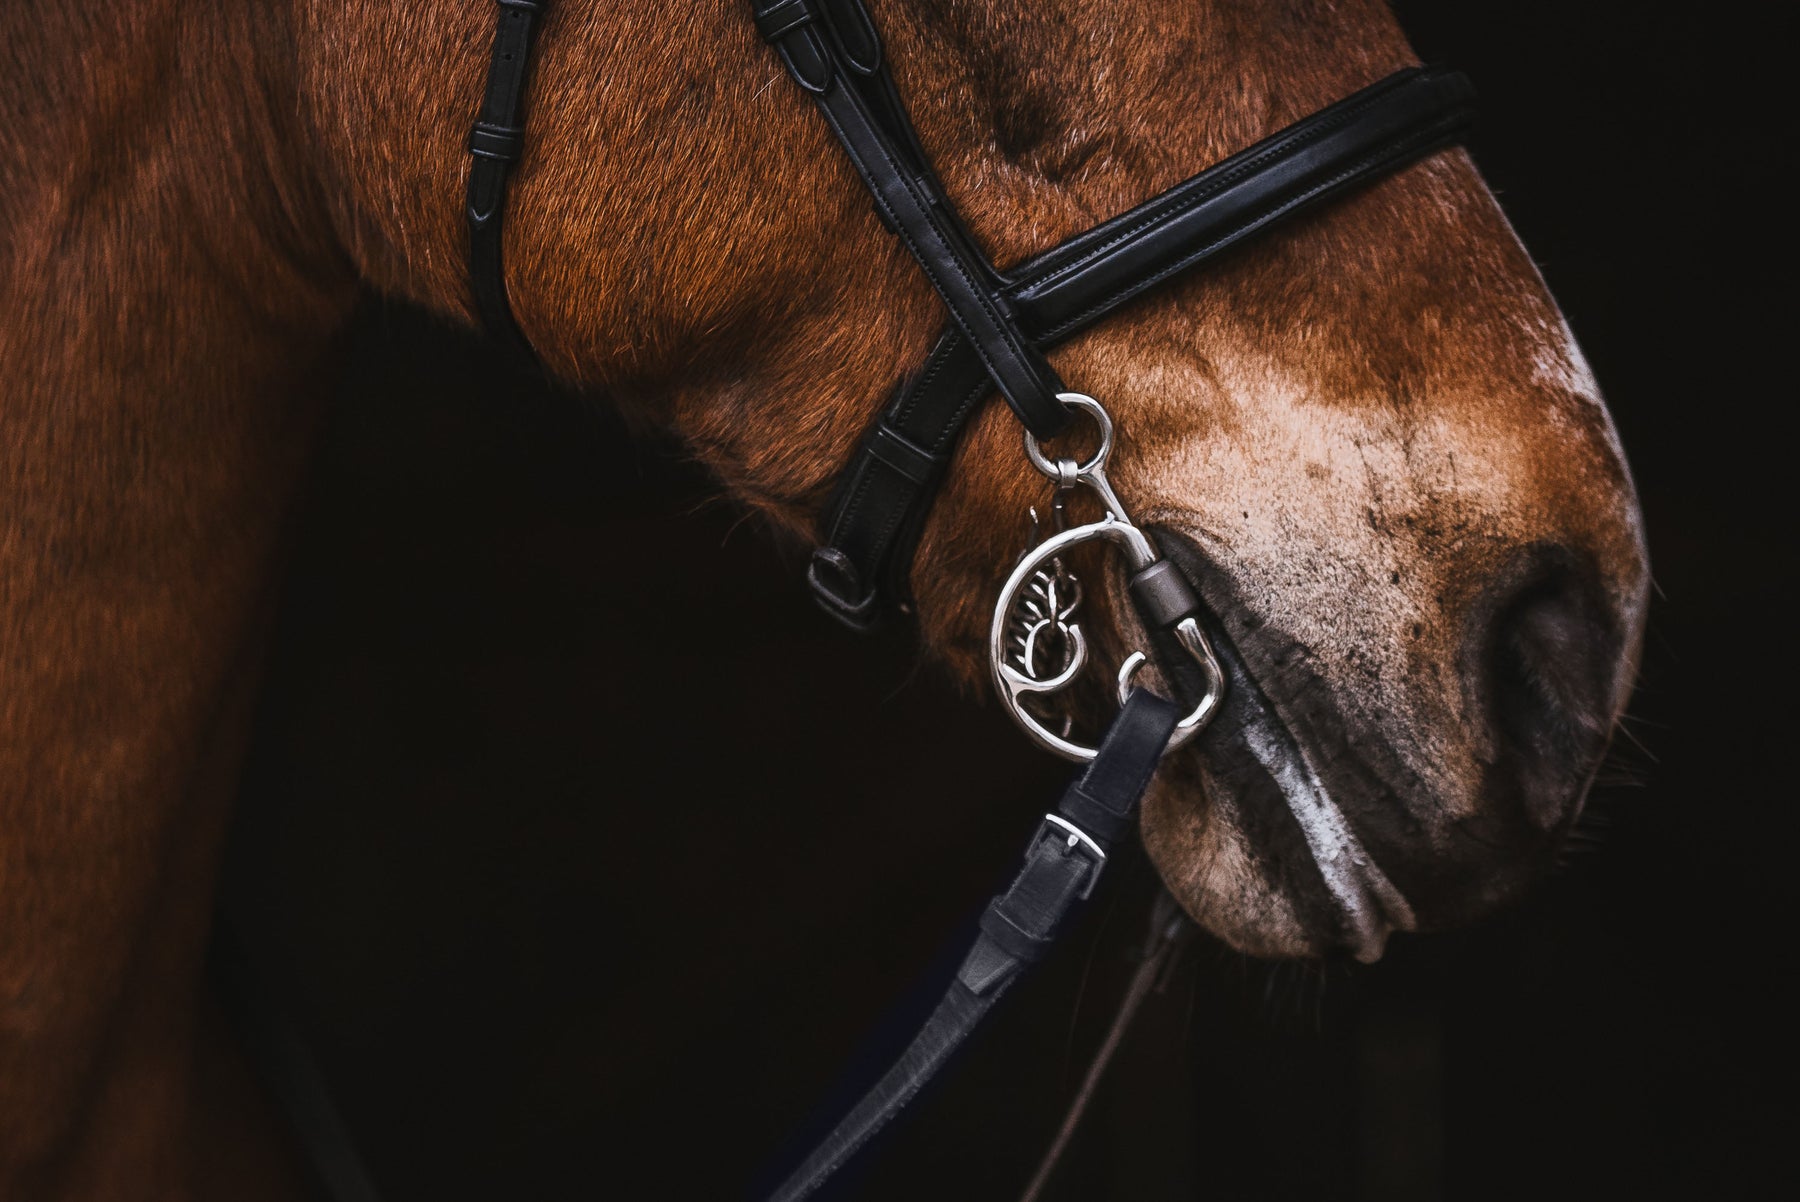 FAGER Bits USA | The Most Advanced Bits for your Horses – Fager Bits USA